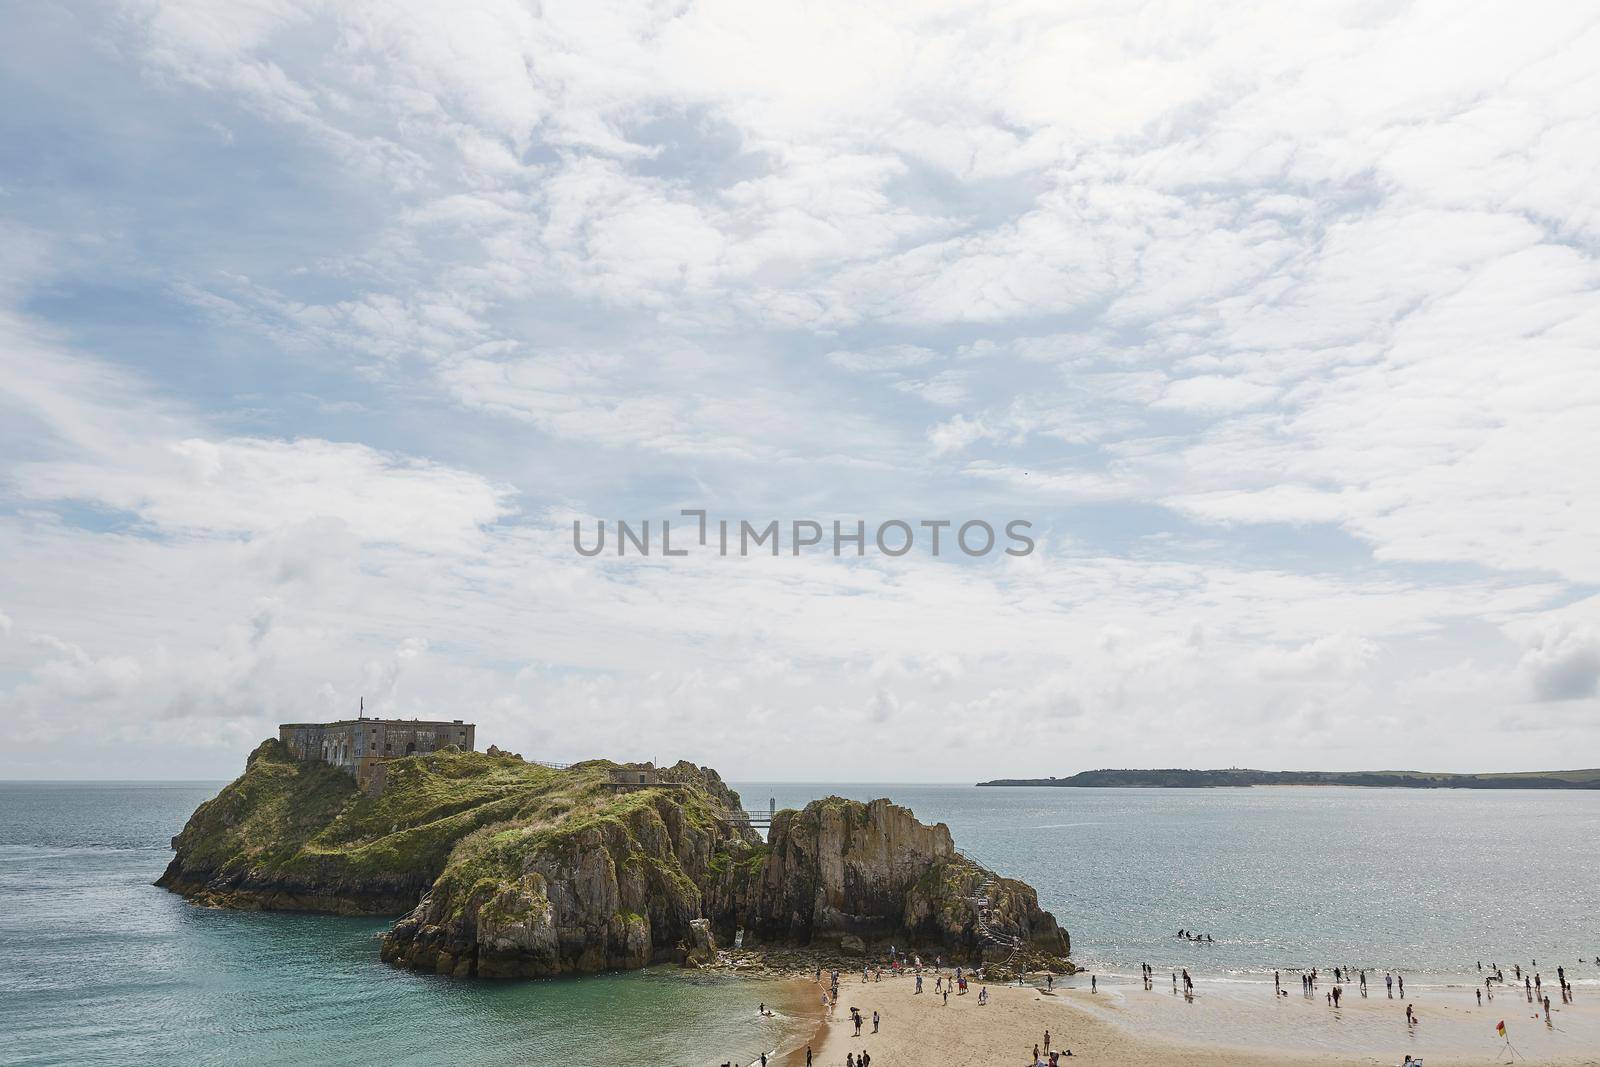 People at the beach in Tenby, an ancient walled town; now a tourist destination in the county of Pembrokeshire, south Wales, UK.